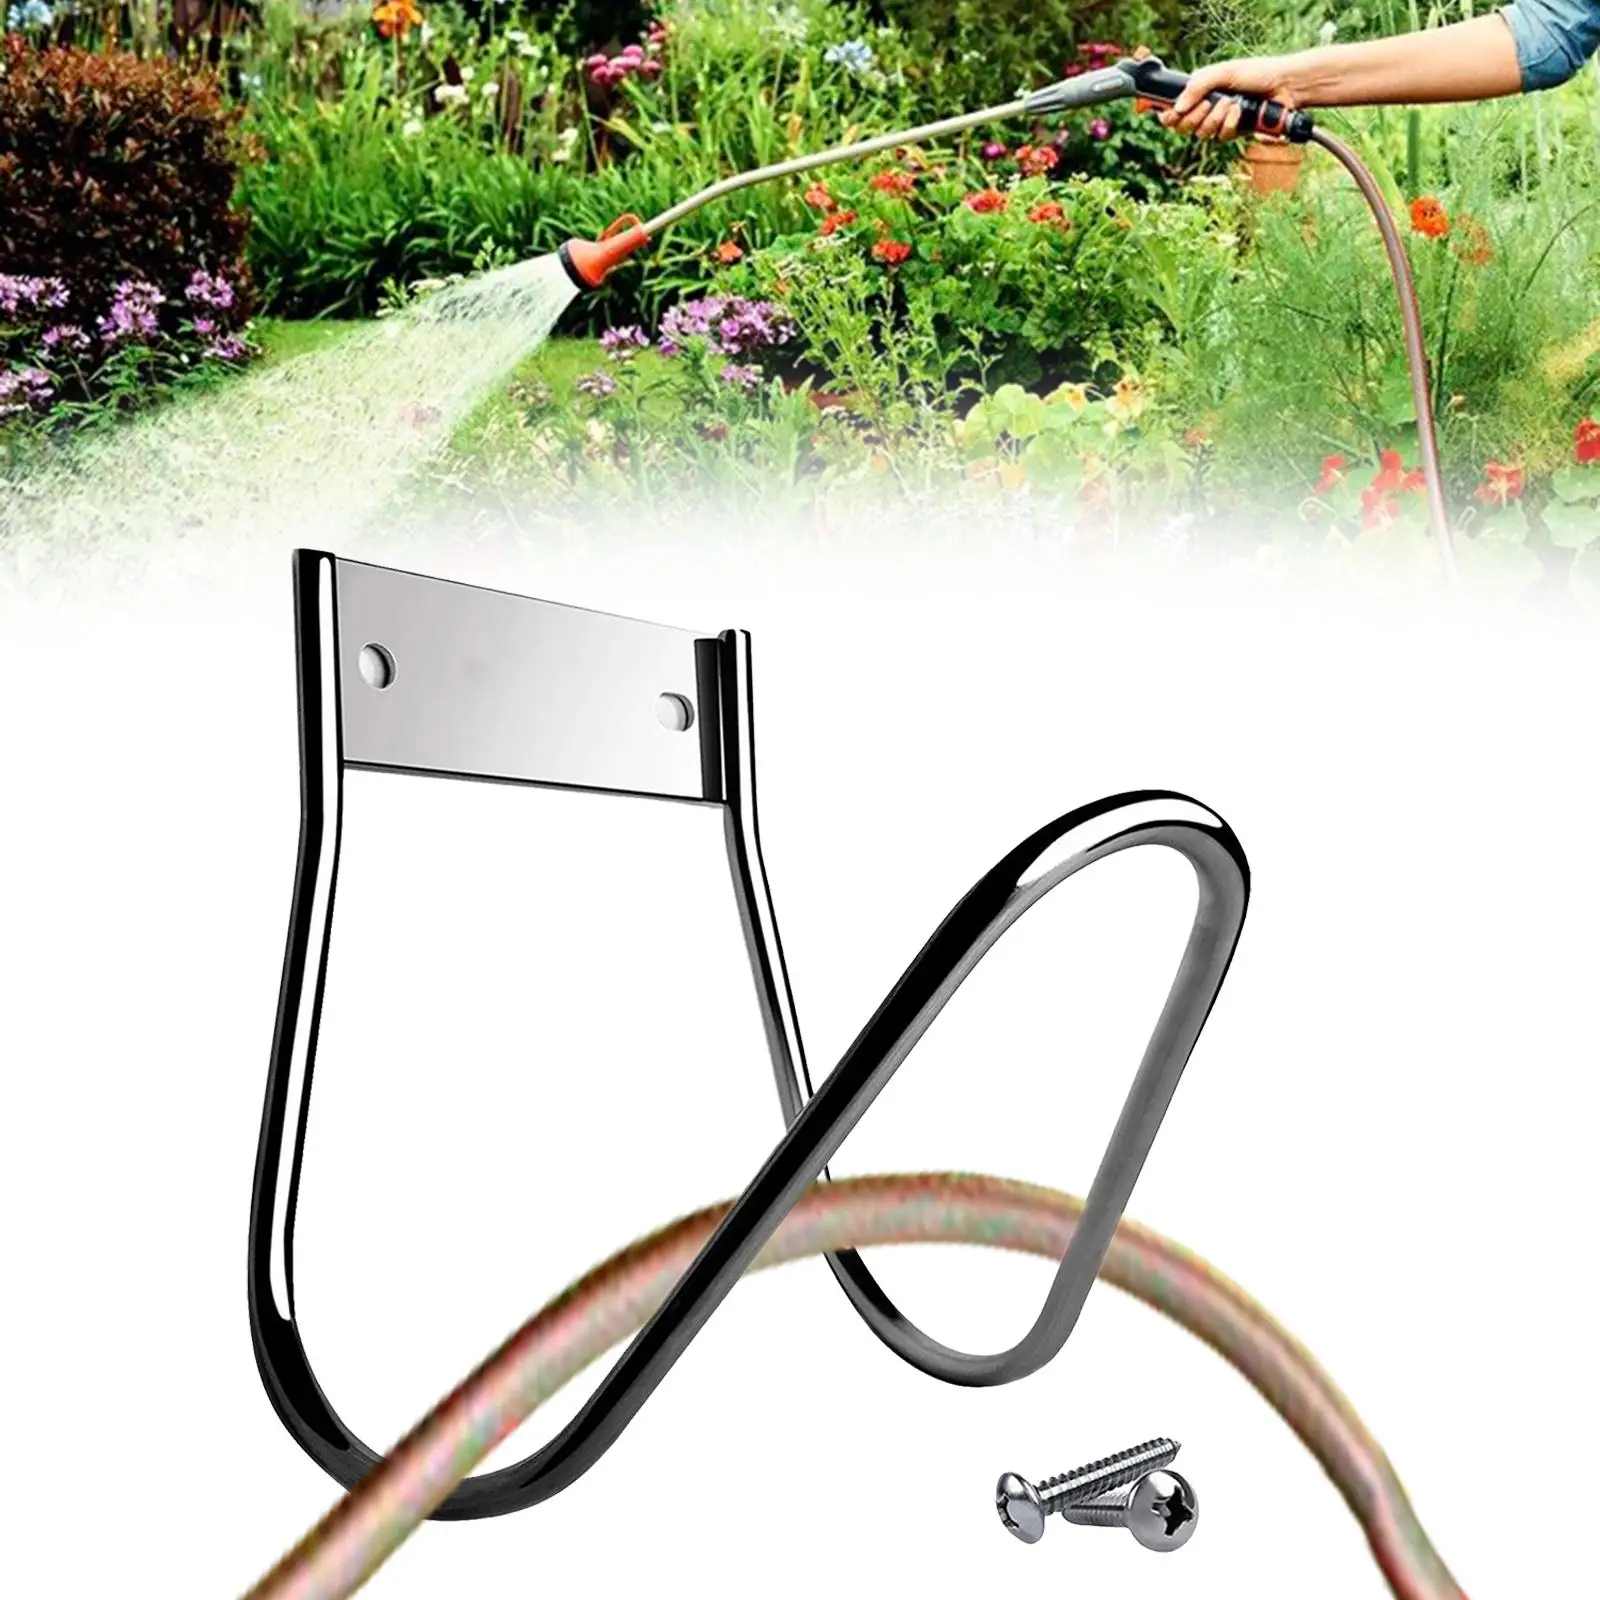 Garden Hose Holder Wall Mounted Stainless Steel Durable Hose Reel Holder Hose Hook Garden Hose Rack for Outside Extension Cords